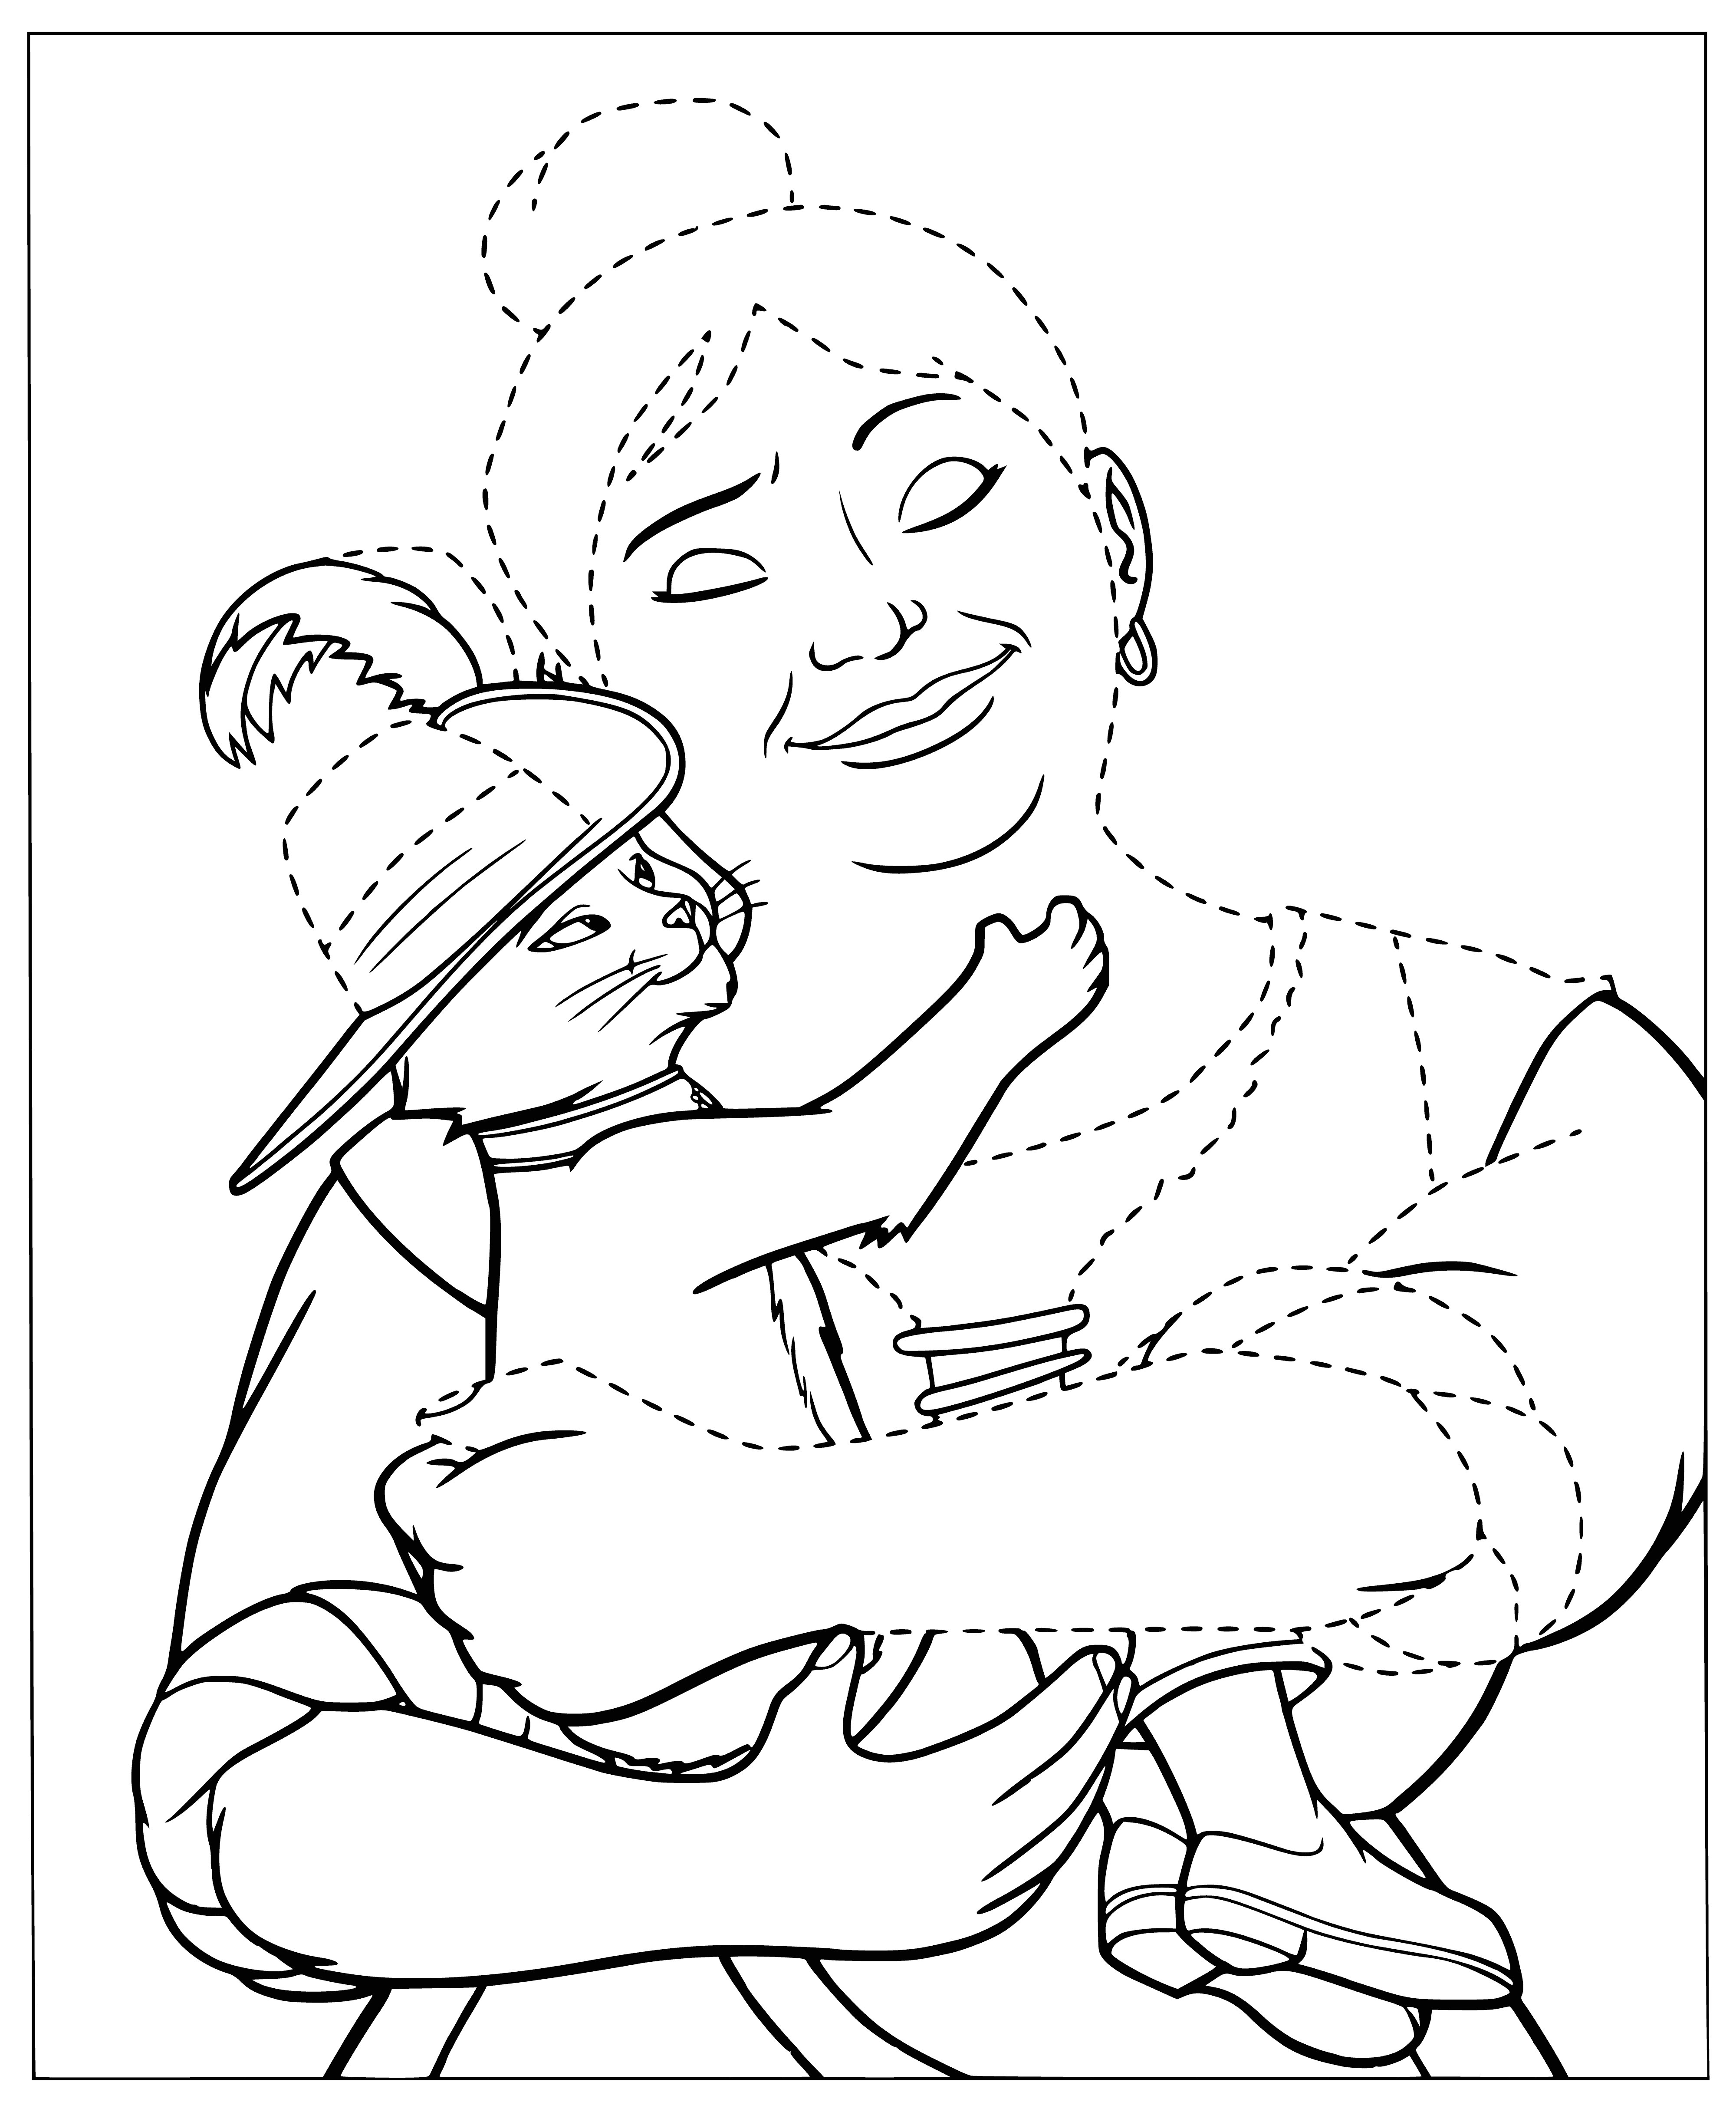 Foster mom coloring page